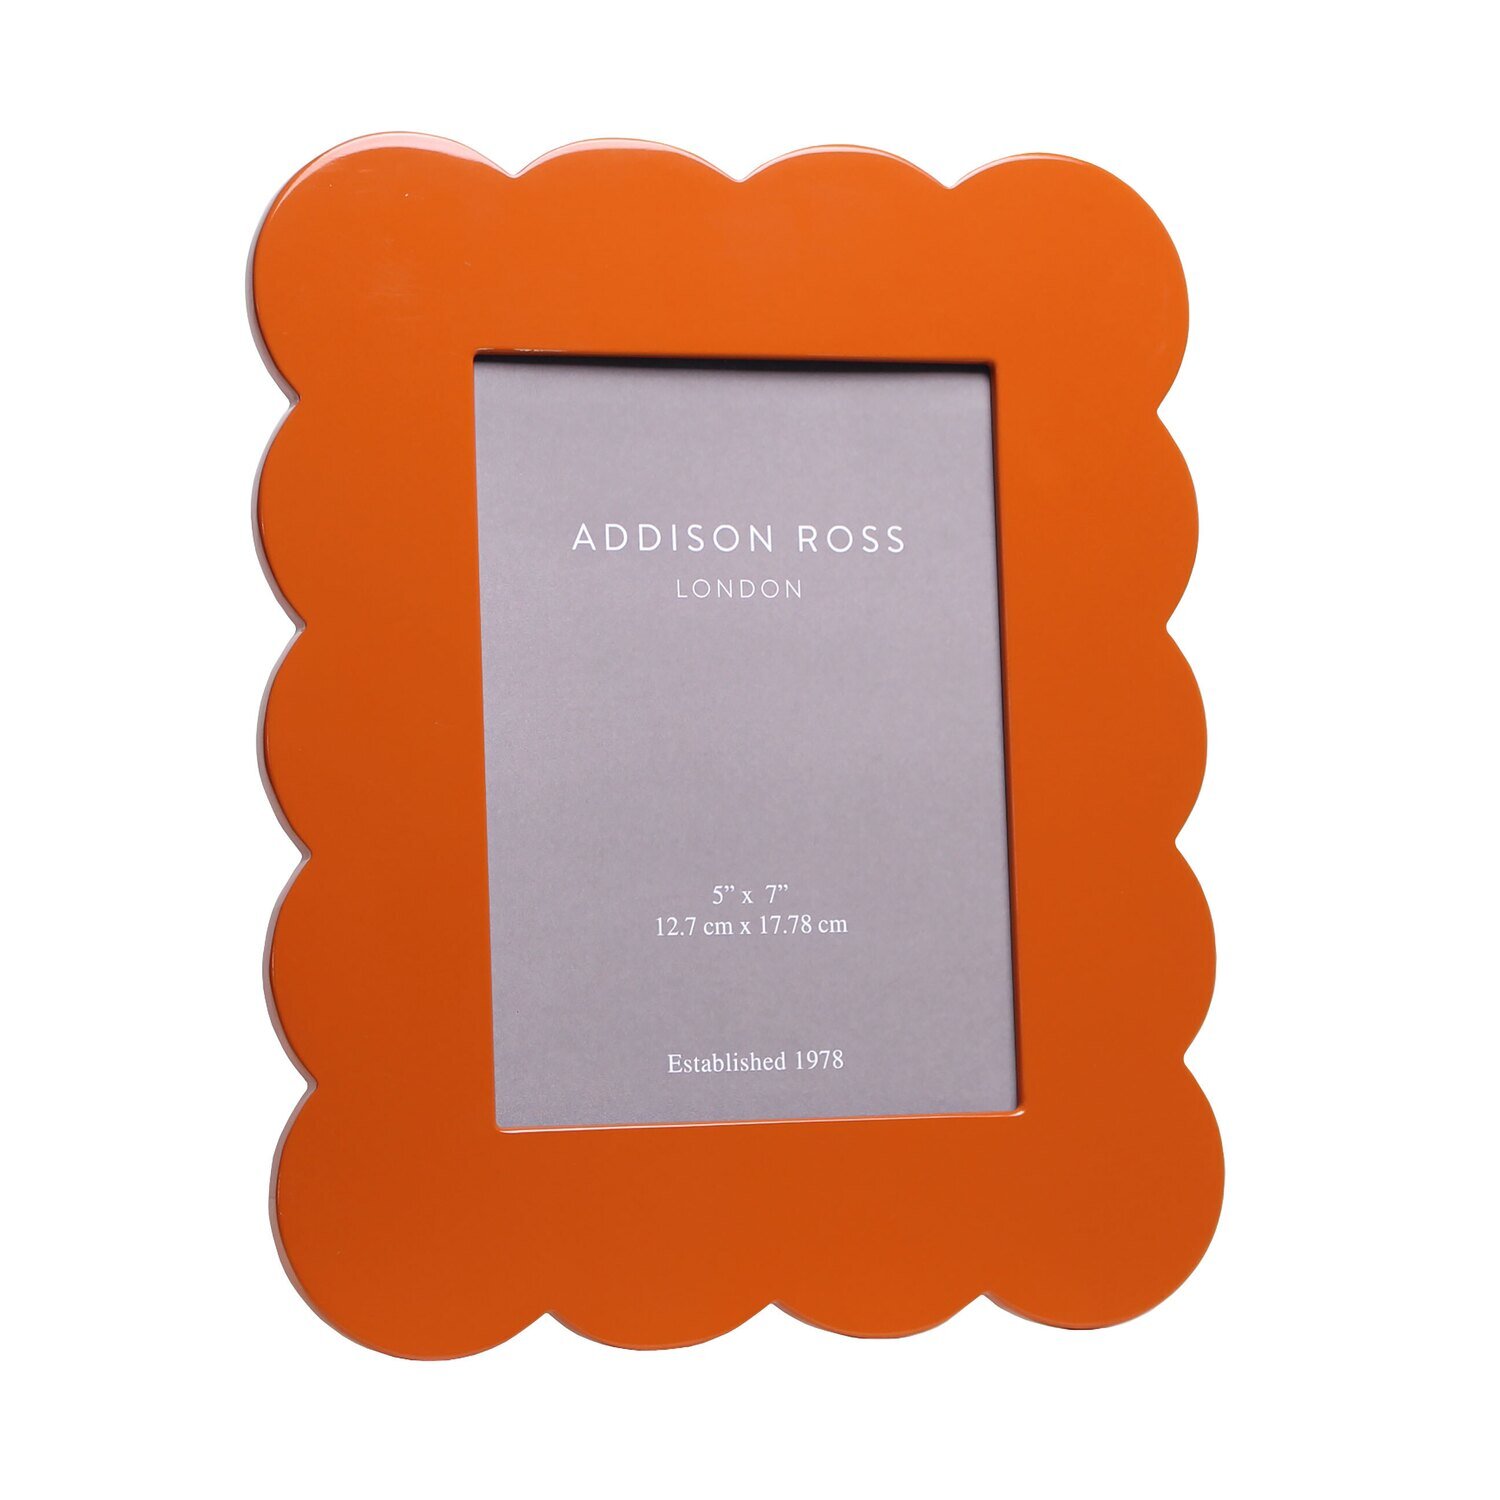 Addison Ross Orange Scalloped Lacquer Photo Frame 5 x 7 Inch Lacquer FR11004